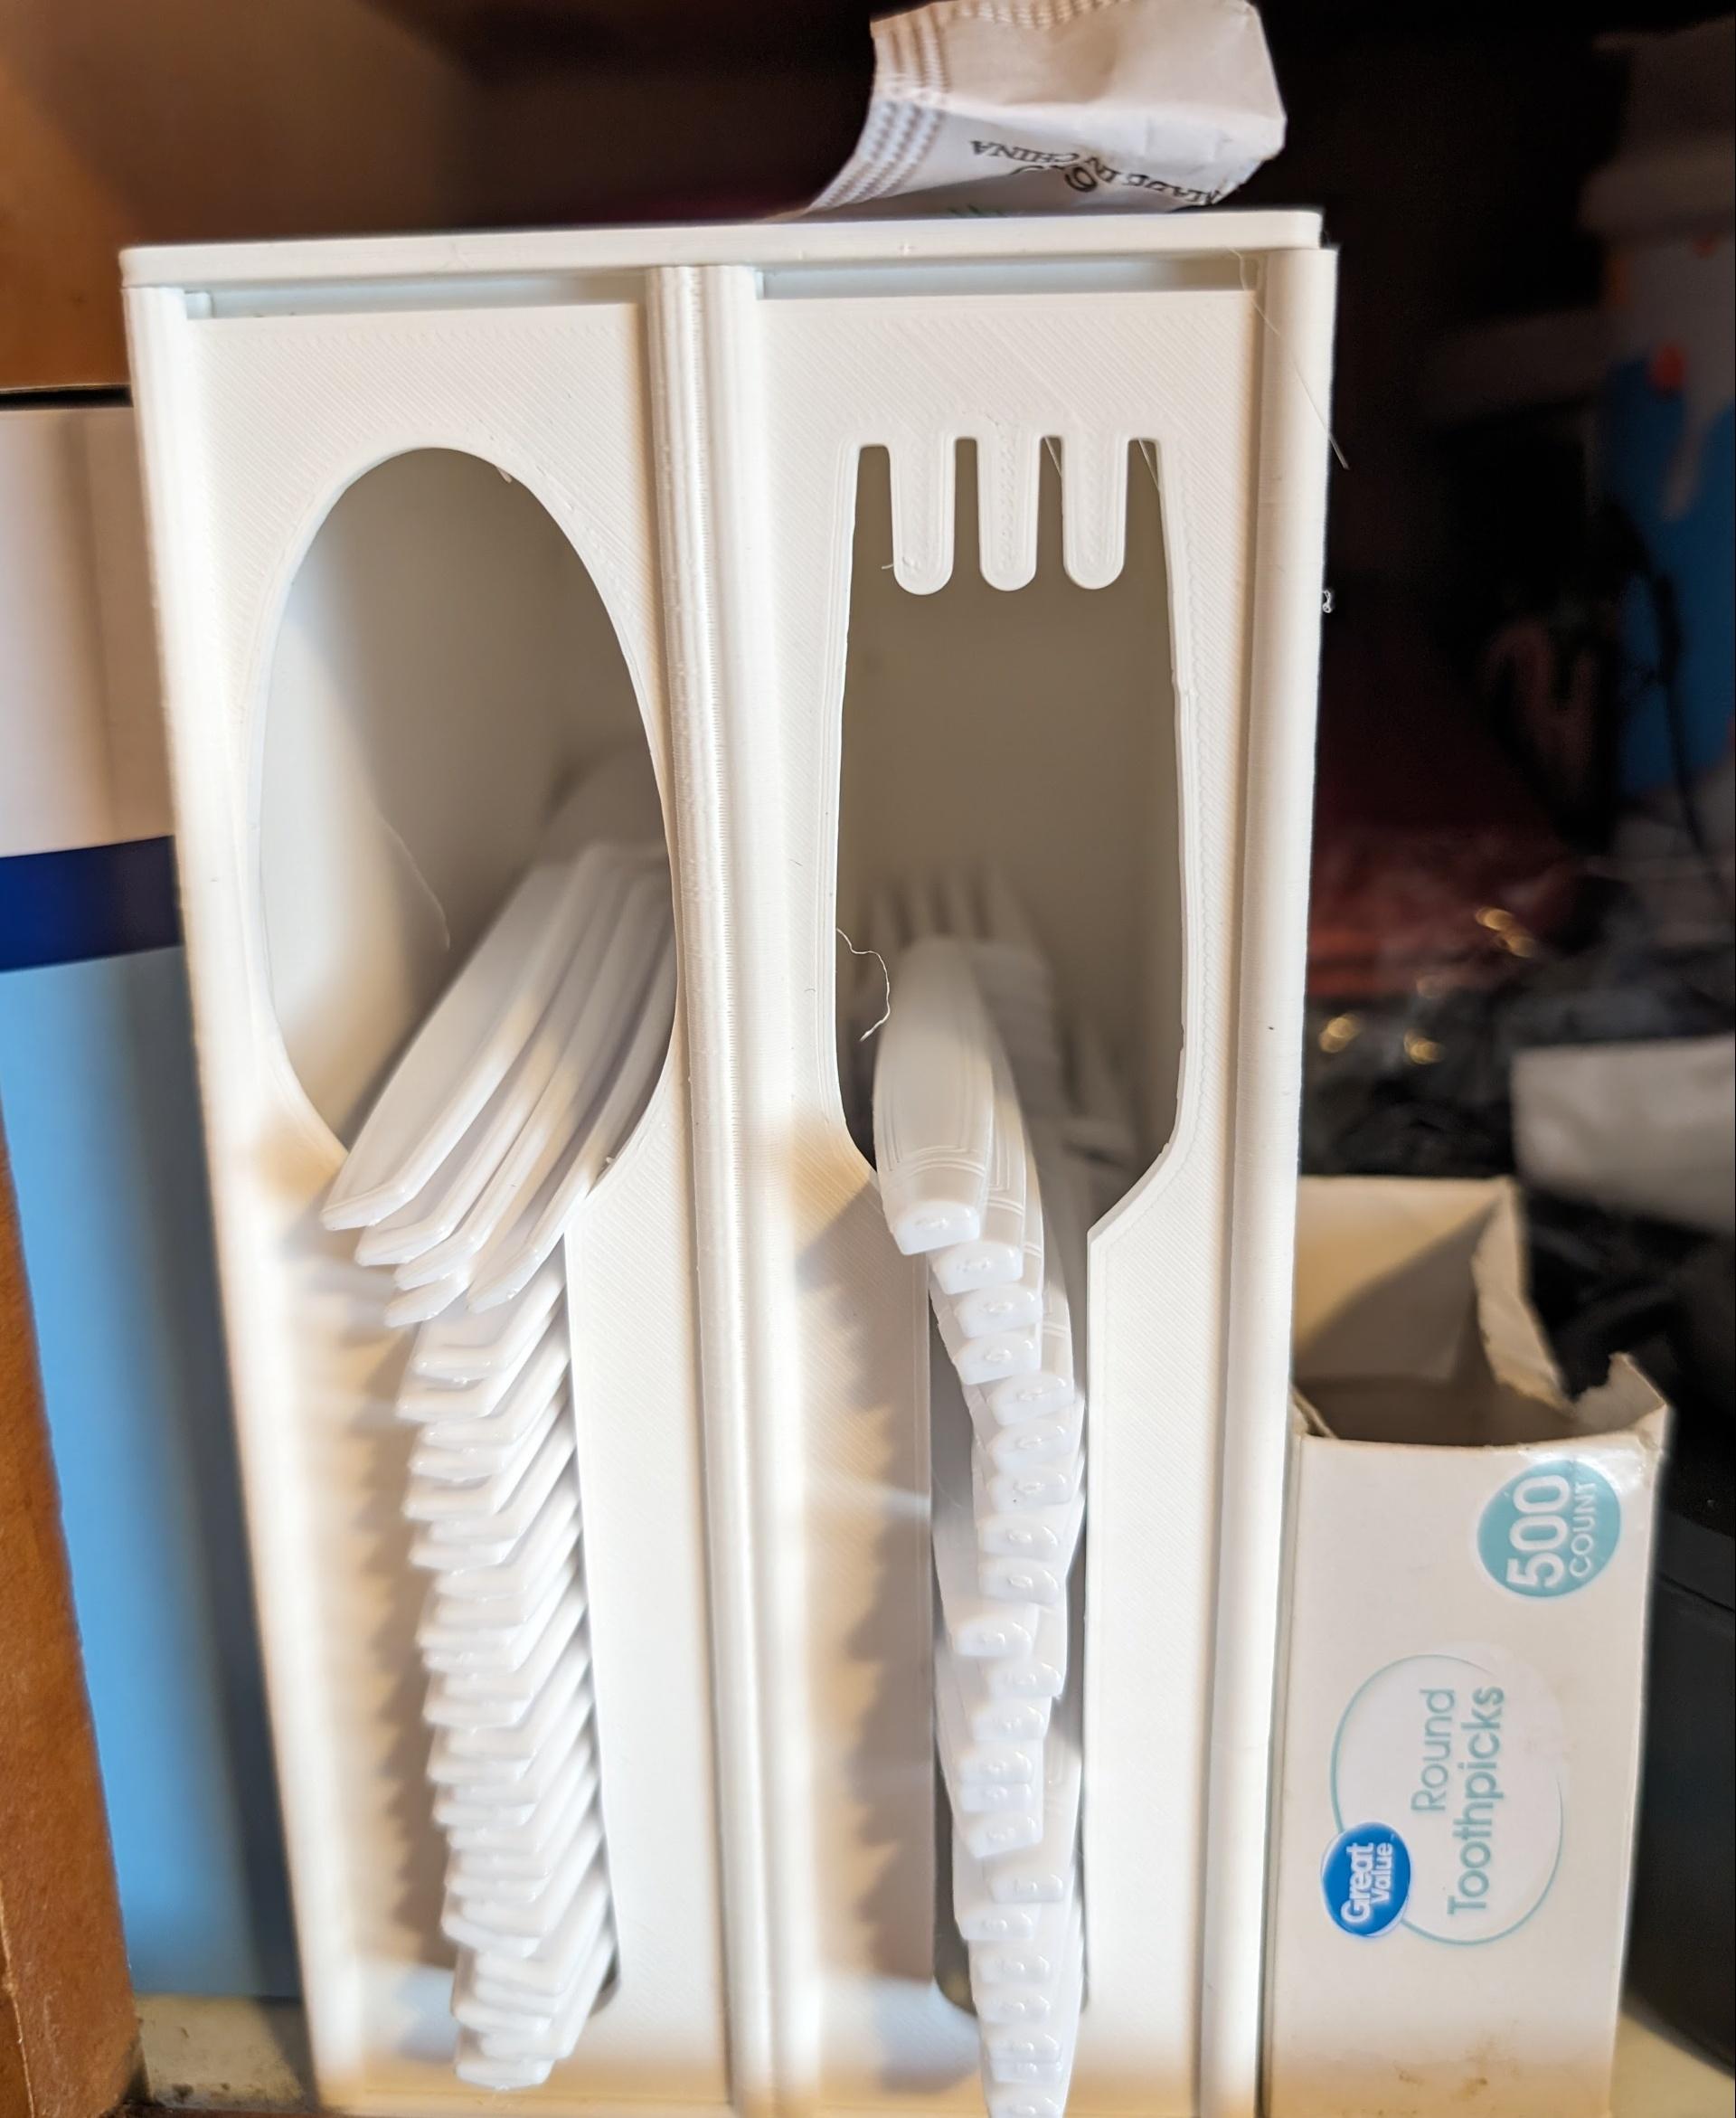 Slim Plastic Utensil Dispenser Collection - Thanks for this design, it frees up cupboard space which is at a premium in our house. 
I opted not to not include the knives, LOL
 - 3d model